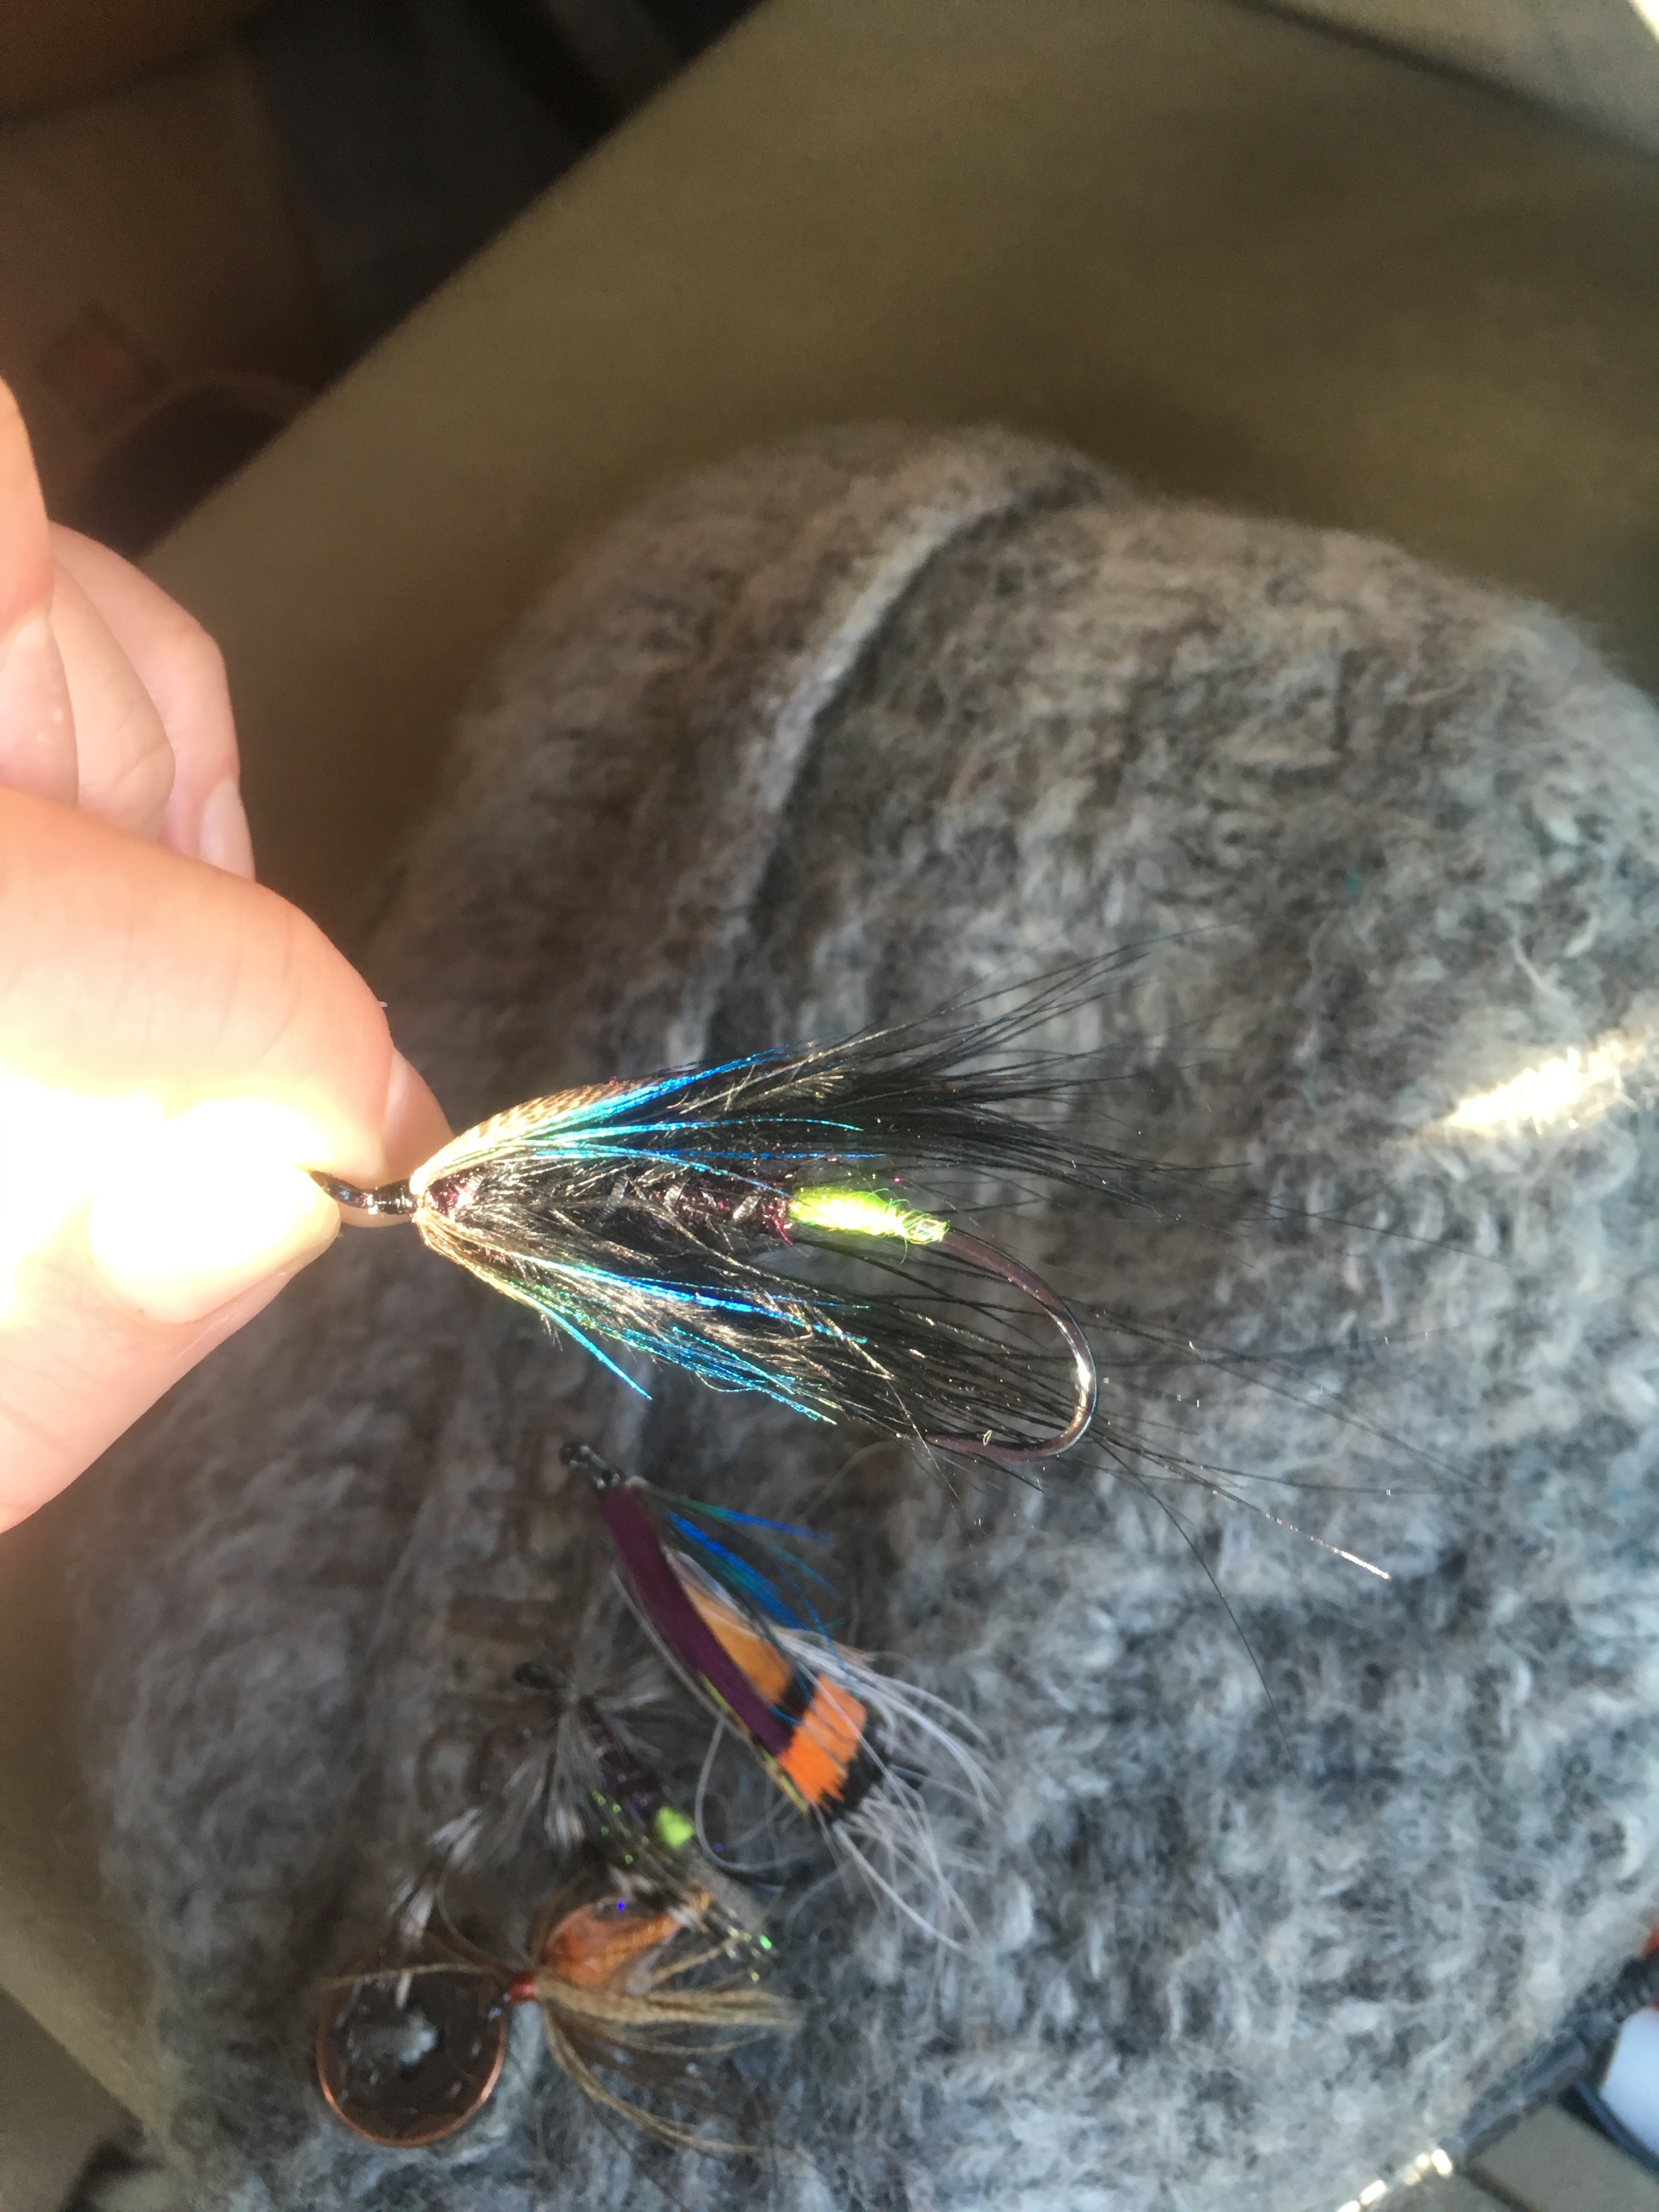 I hooked and lost my first CW Steelhead on this creation by Aaron Broughton